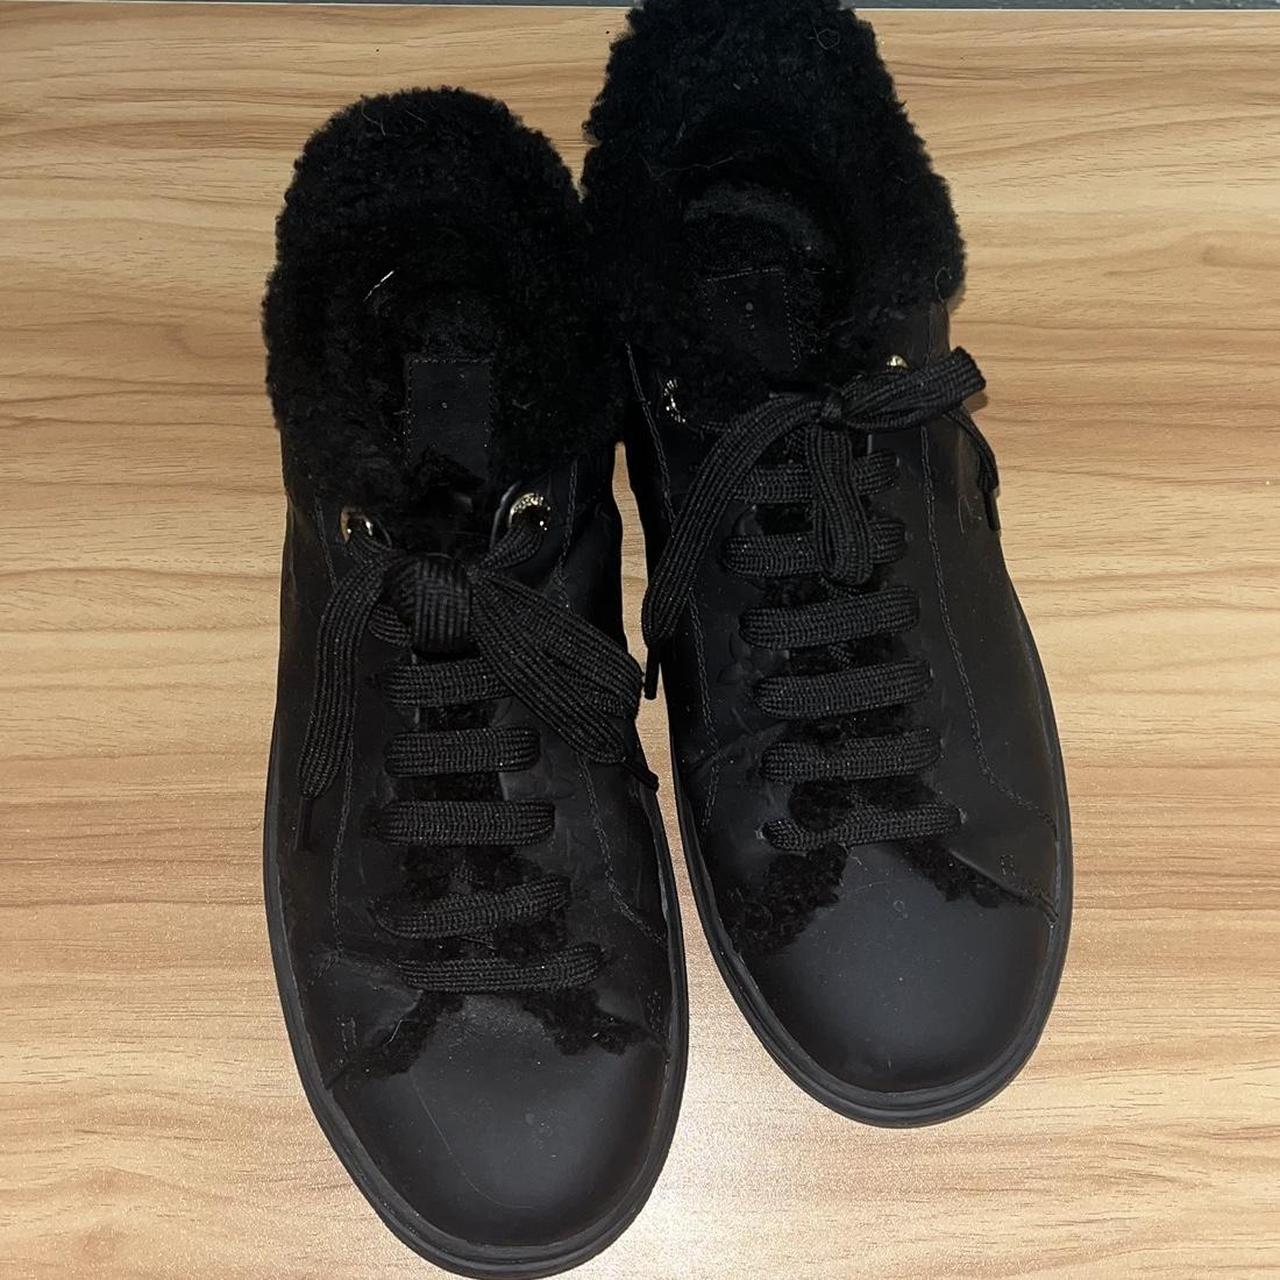 LOUIS VUITTON FUR SHOES , Worn with care (barely any